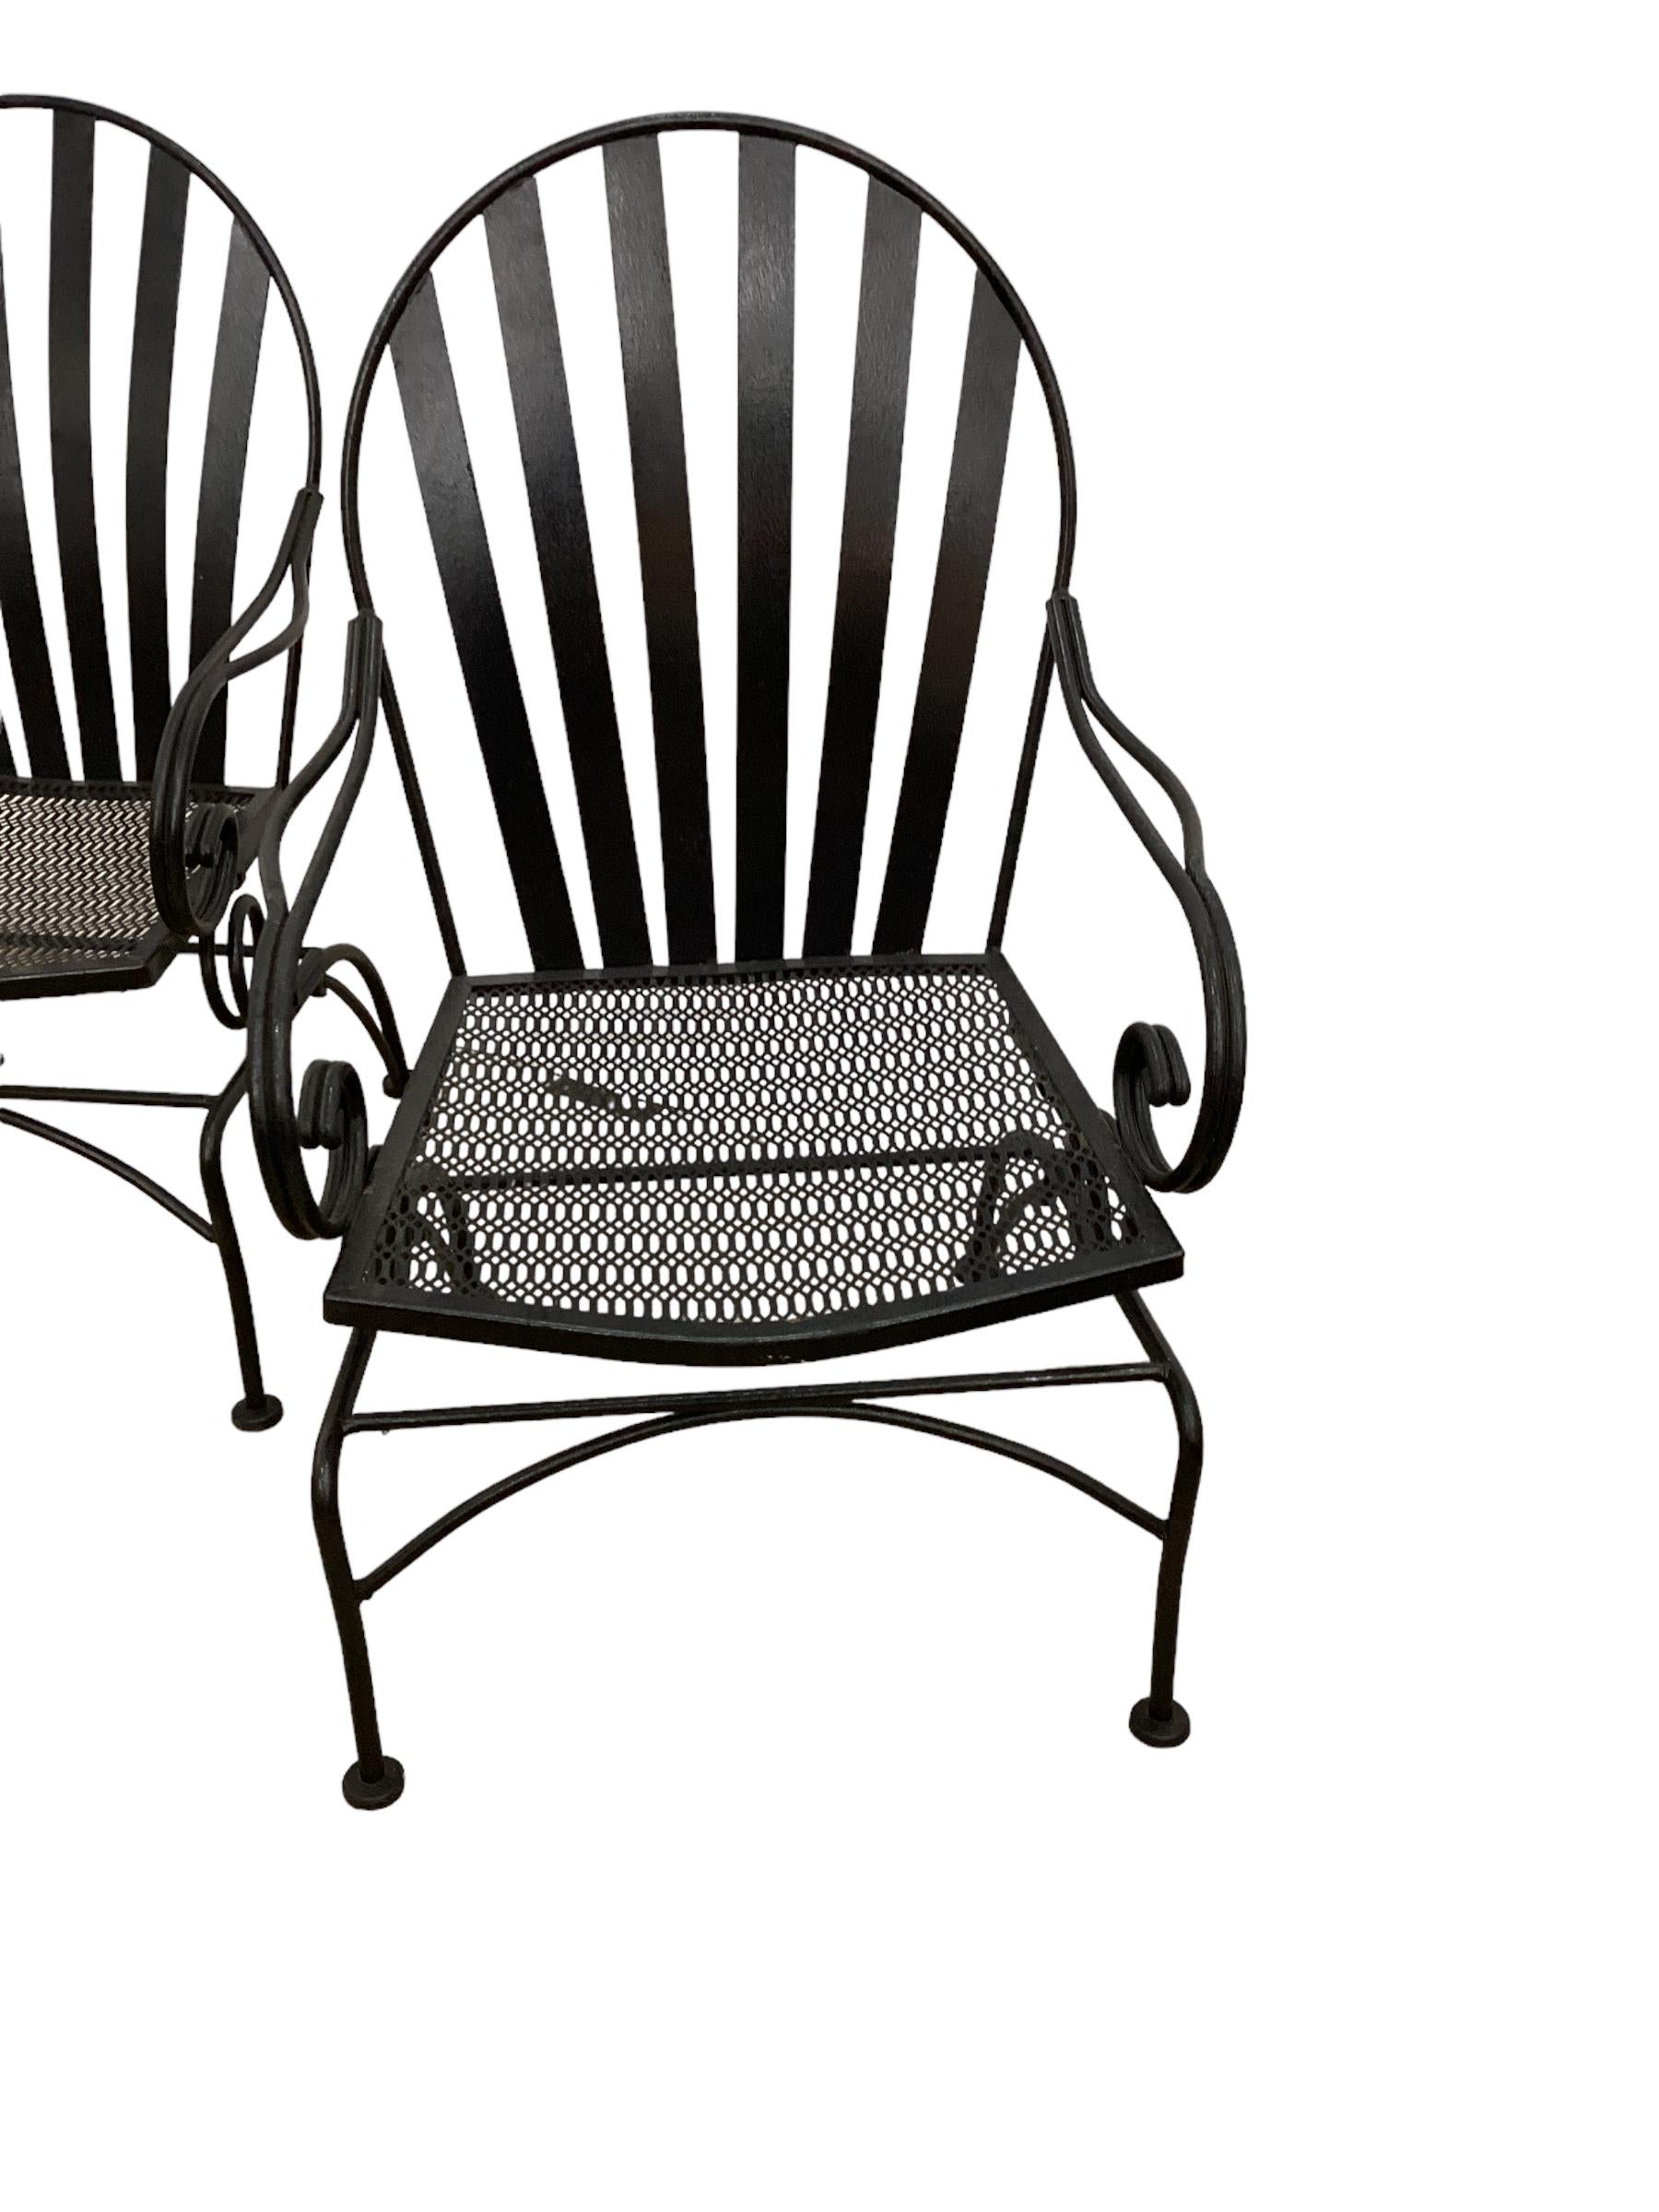 American Pair of Vintage Iron Cantilevered Chairs  For Sale